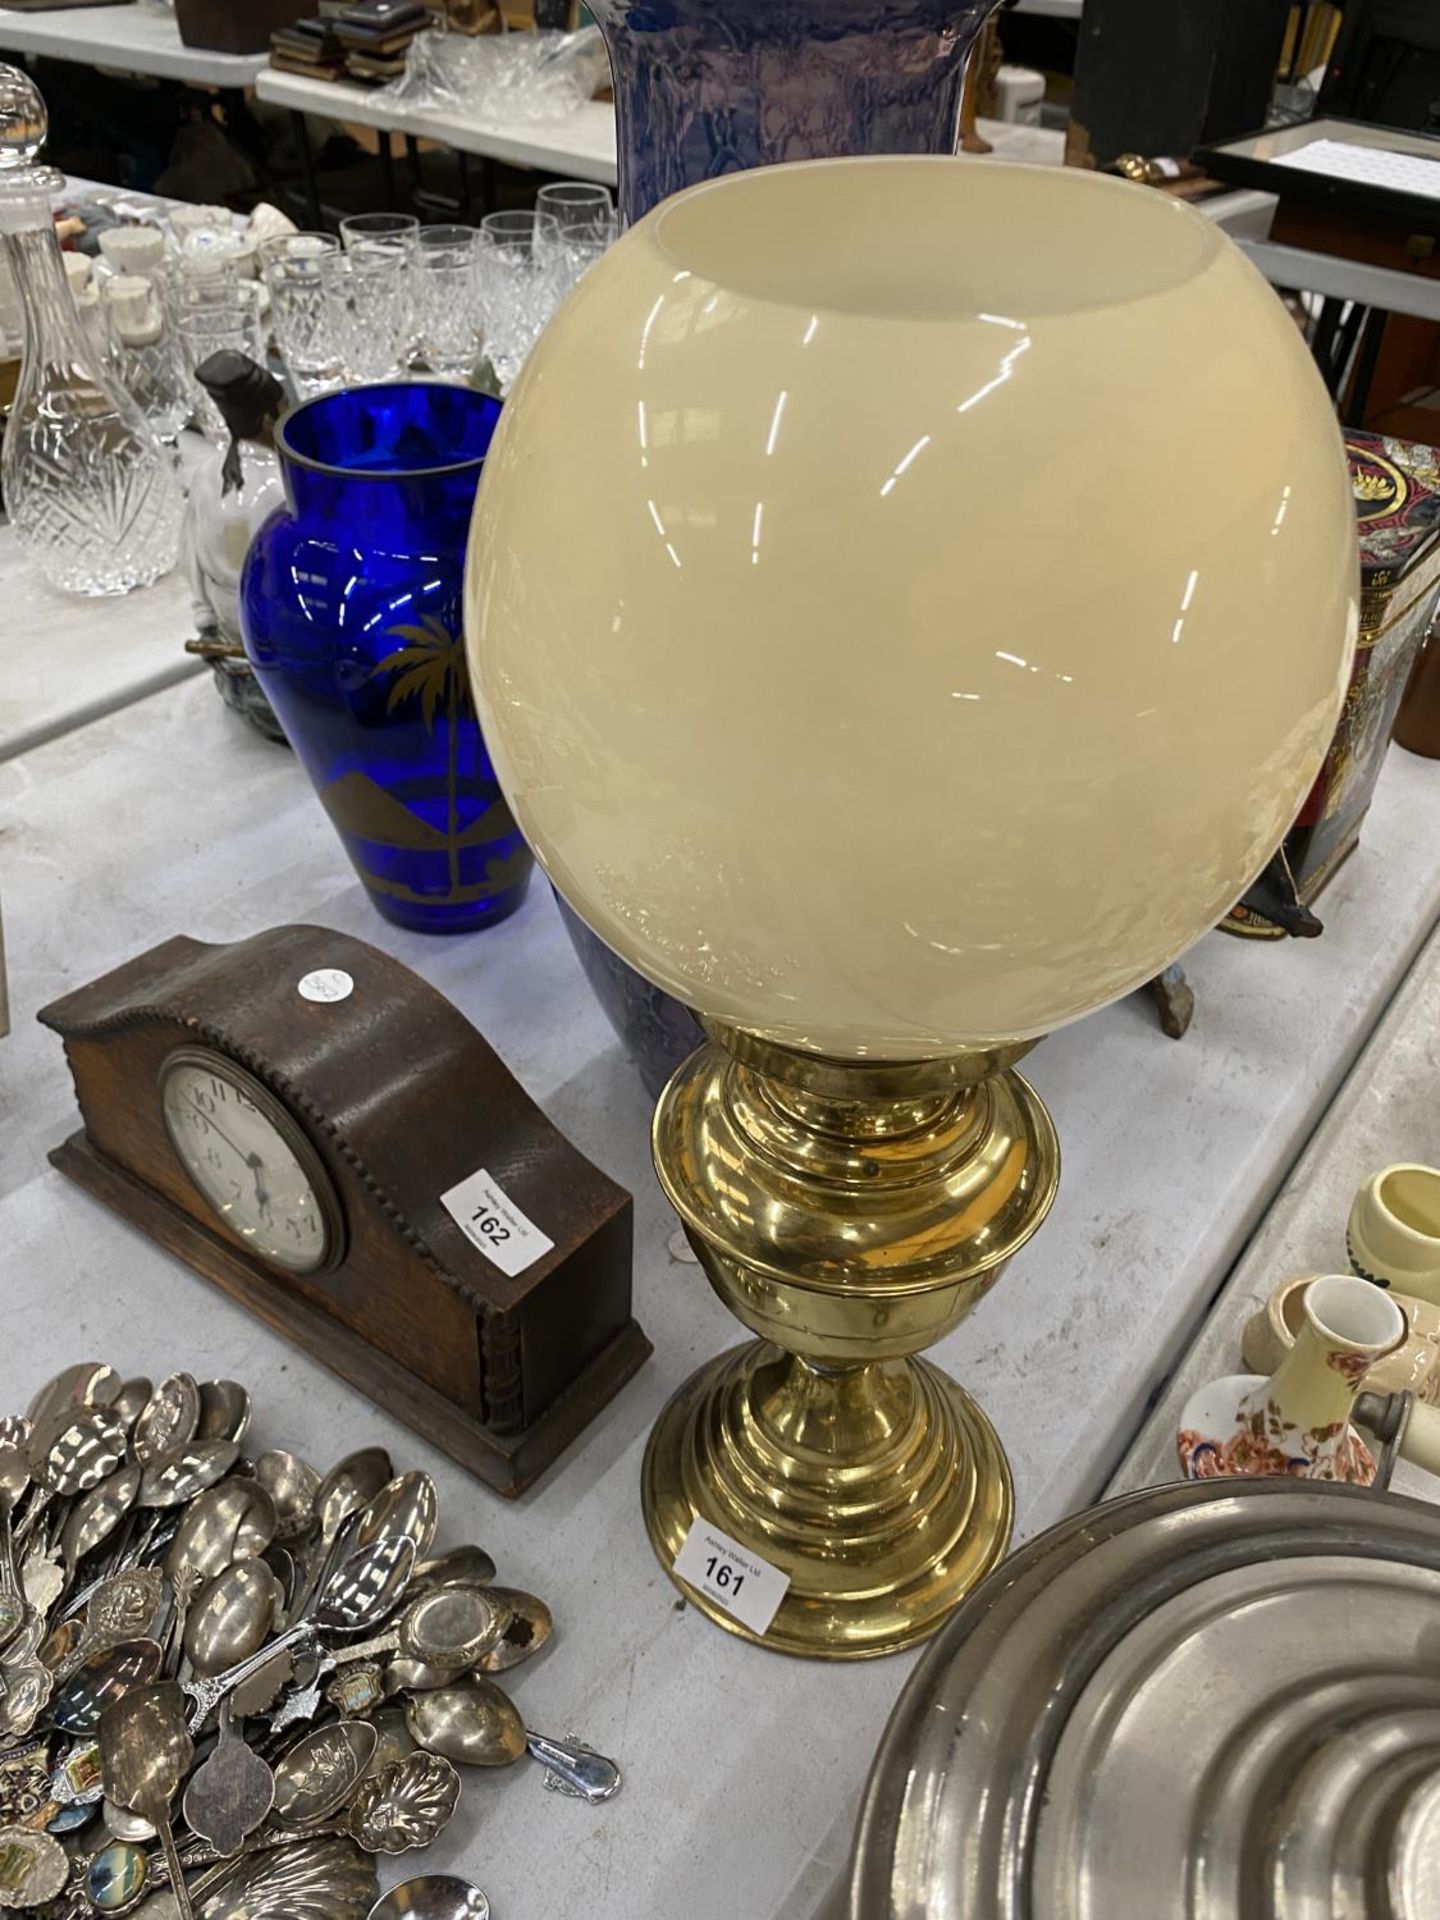 A VINTAGE BRASS OIL LAMP WITH A GLASS SHADE - Image 2 of 2